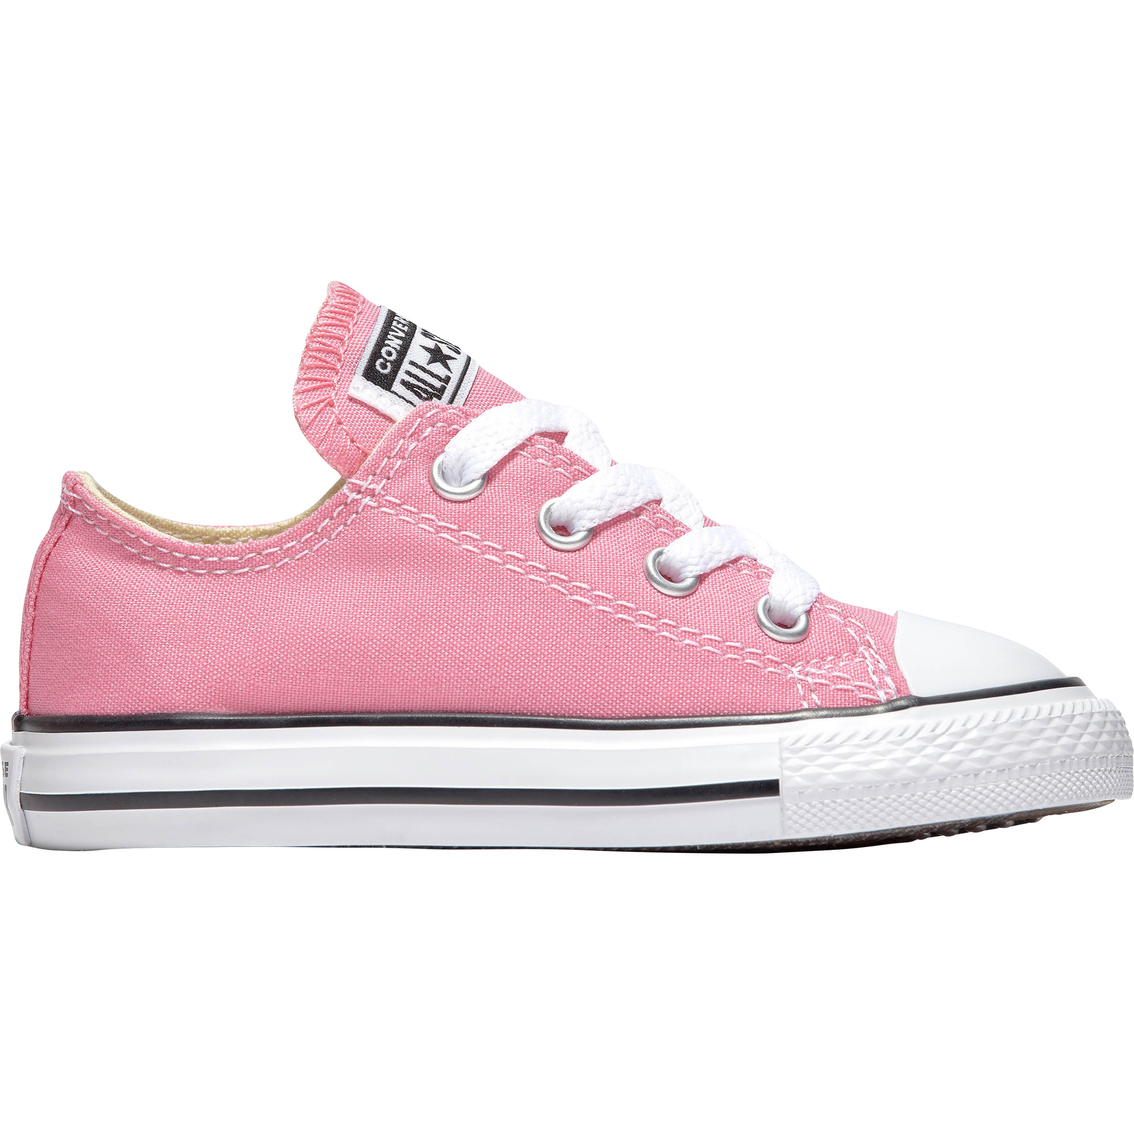 Converse Toddler Girls Chuck Taylor All Star Oxford Sneakers | Sneakers ...